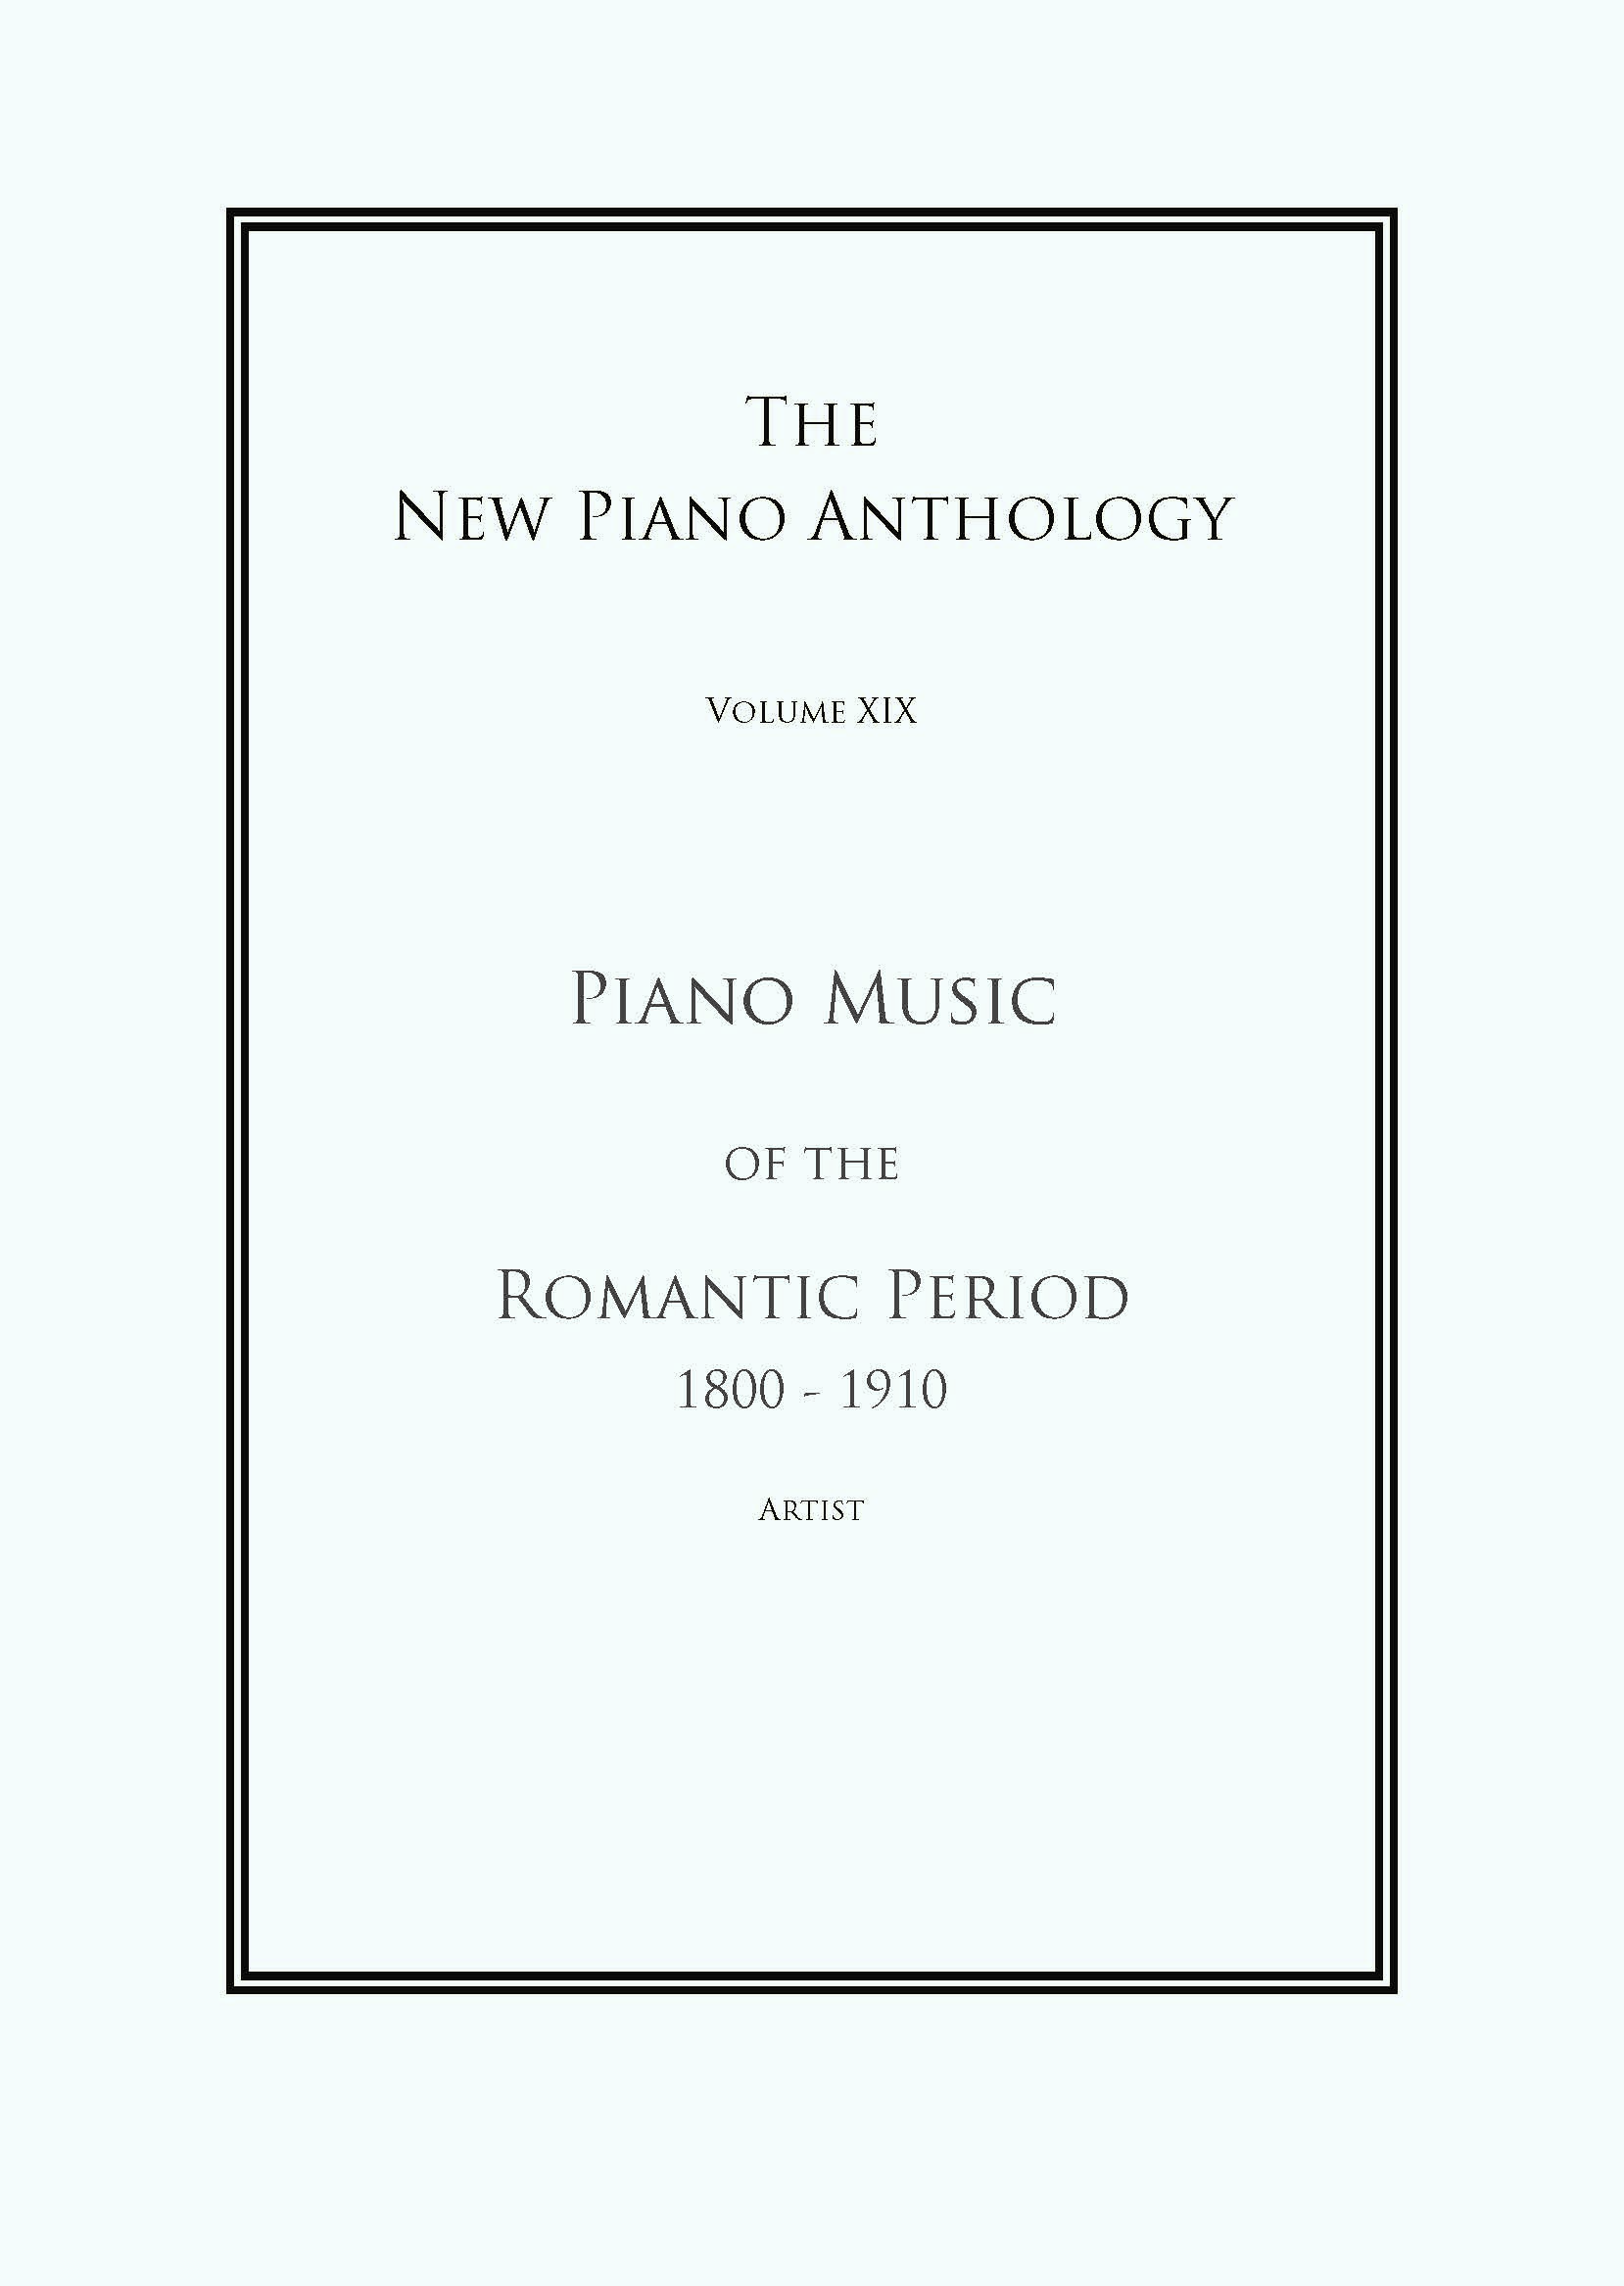 Keyboard Music from the Romantic Period (Artist)